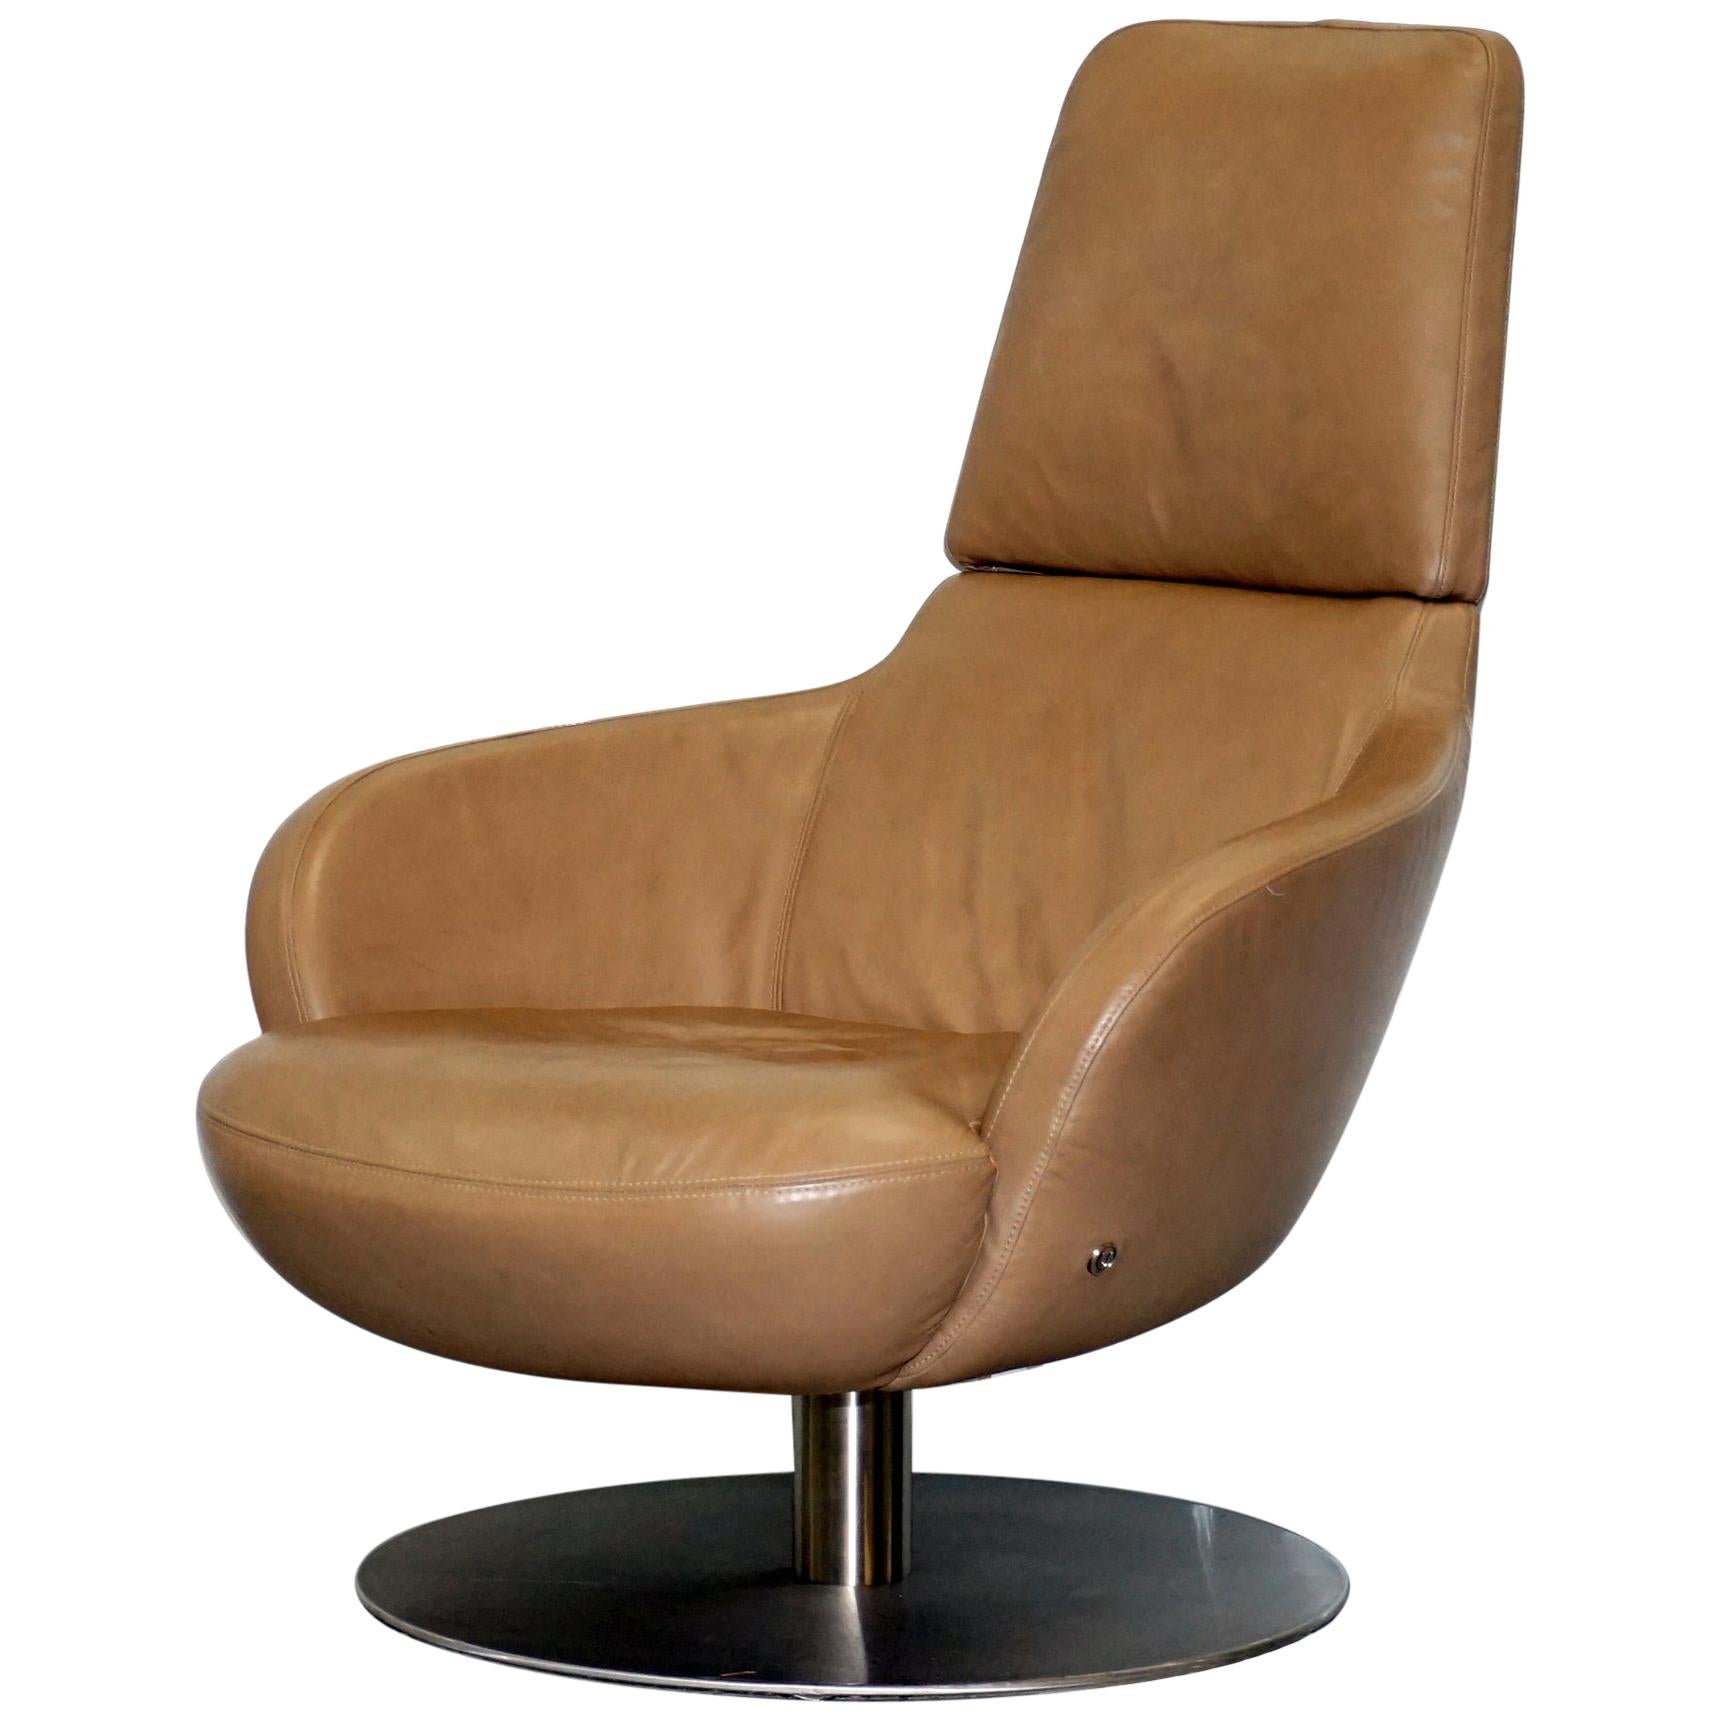 Rare Made in Italy Natuzzi Brend Swivel Armchair, Aged Brown Leather